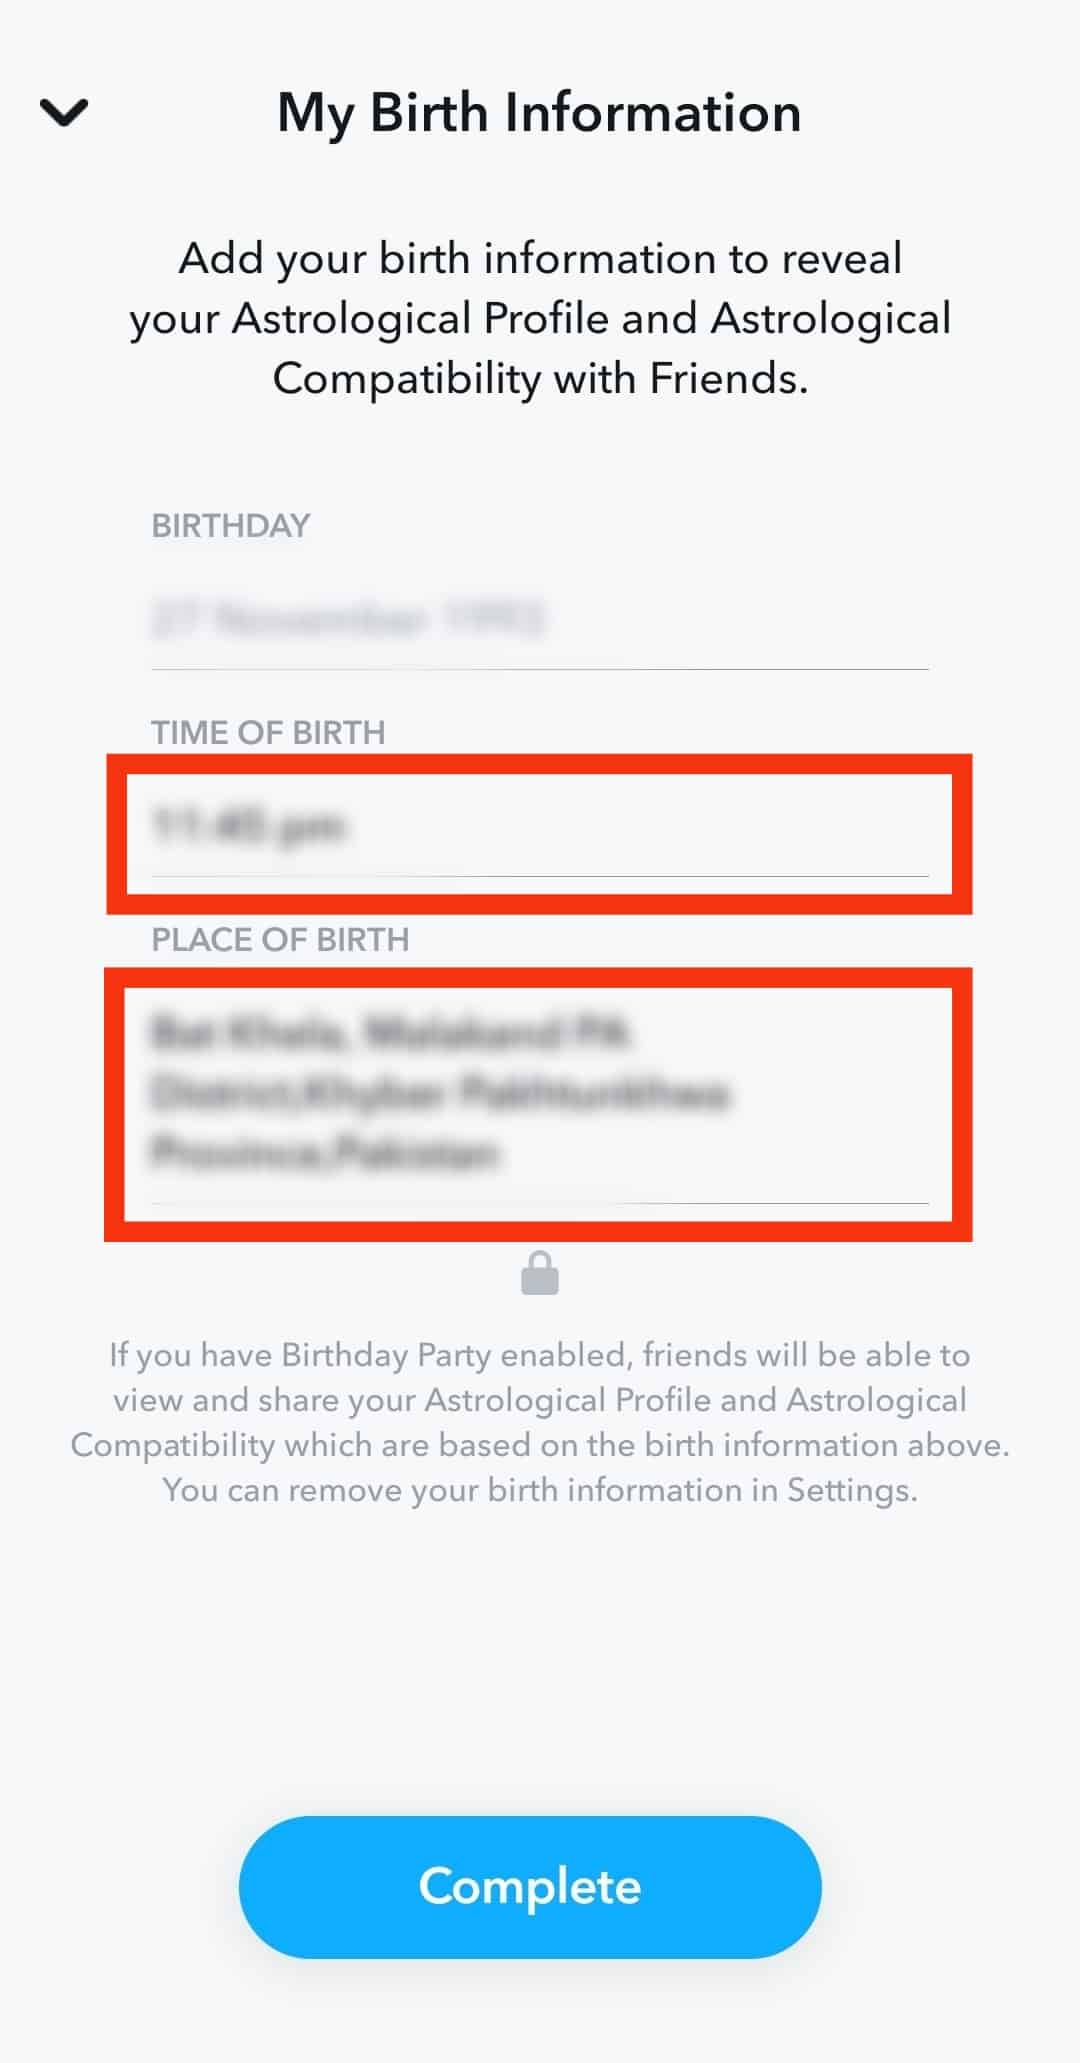 Fill In The Time Of Birth And Place Of Birth